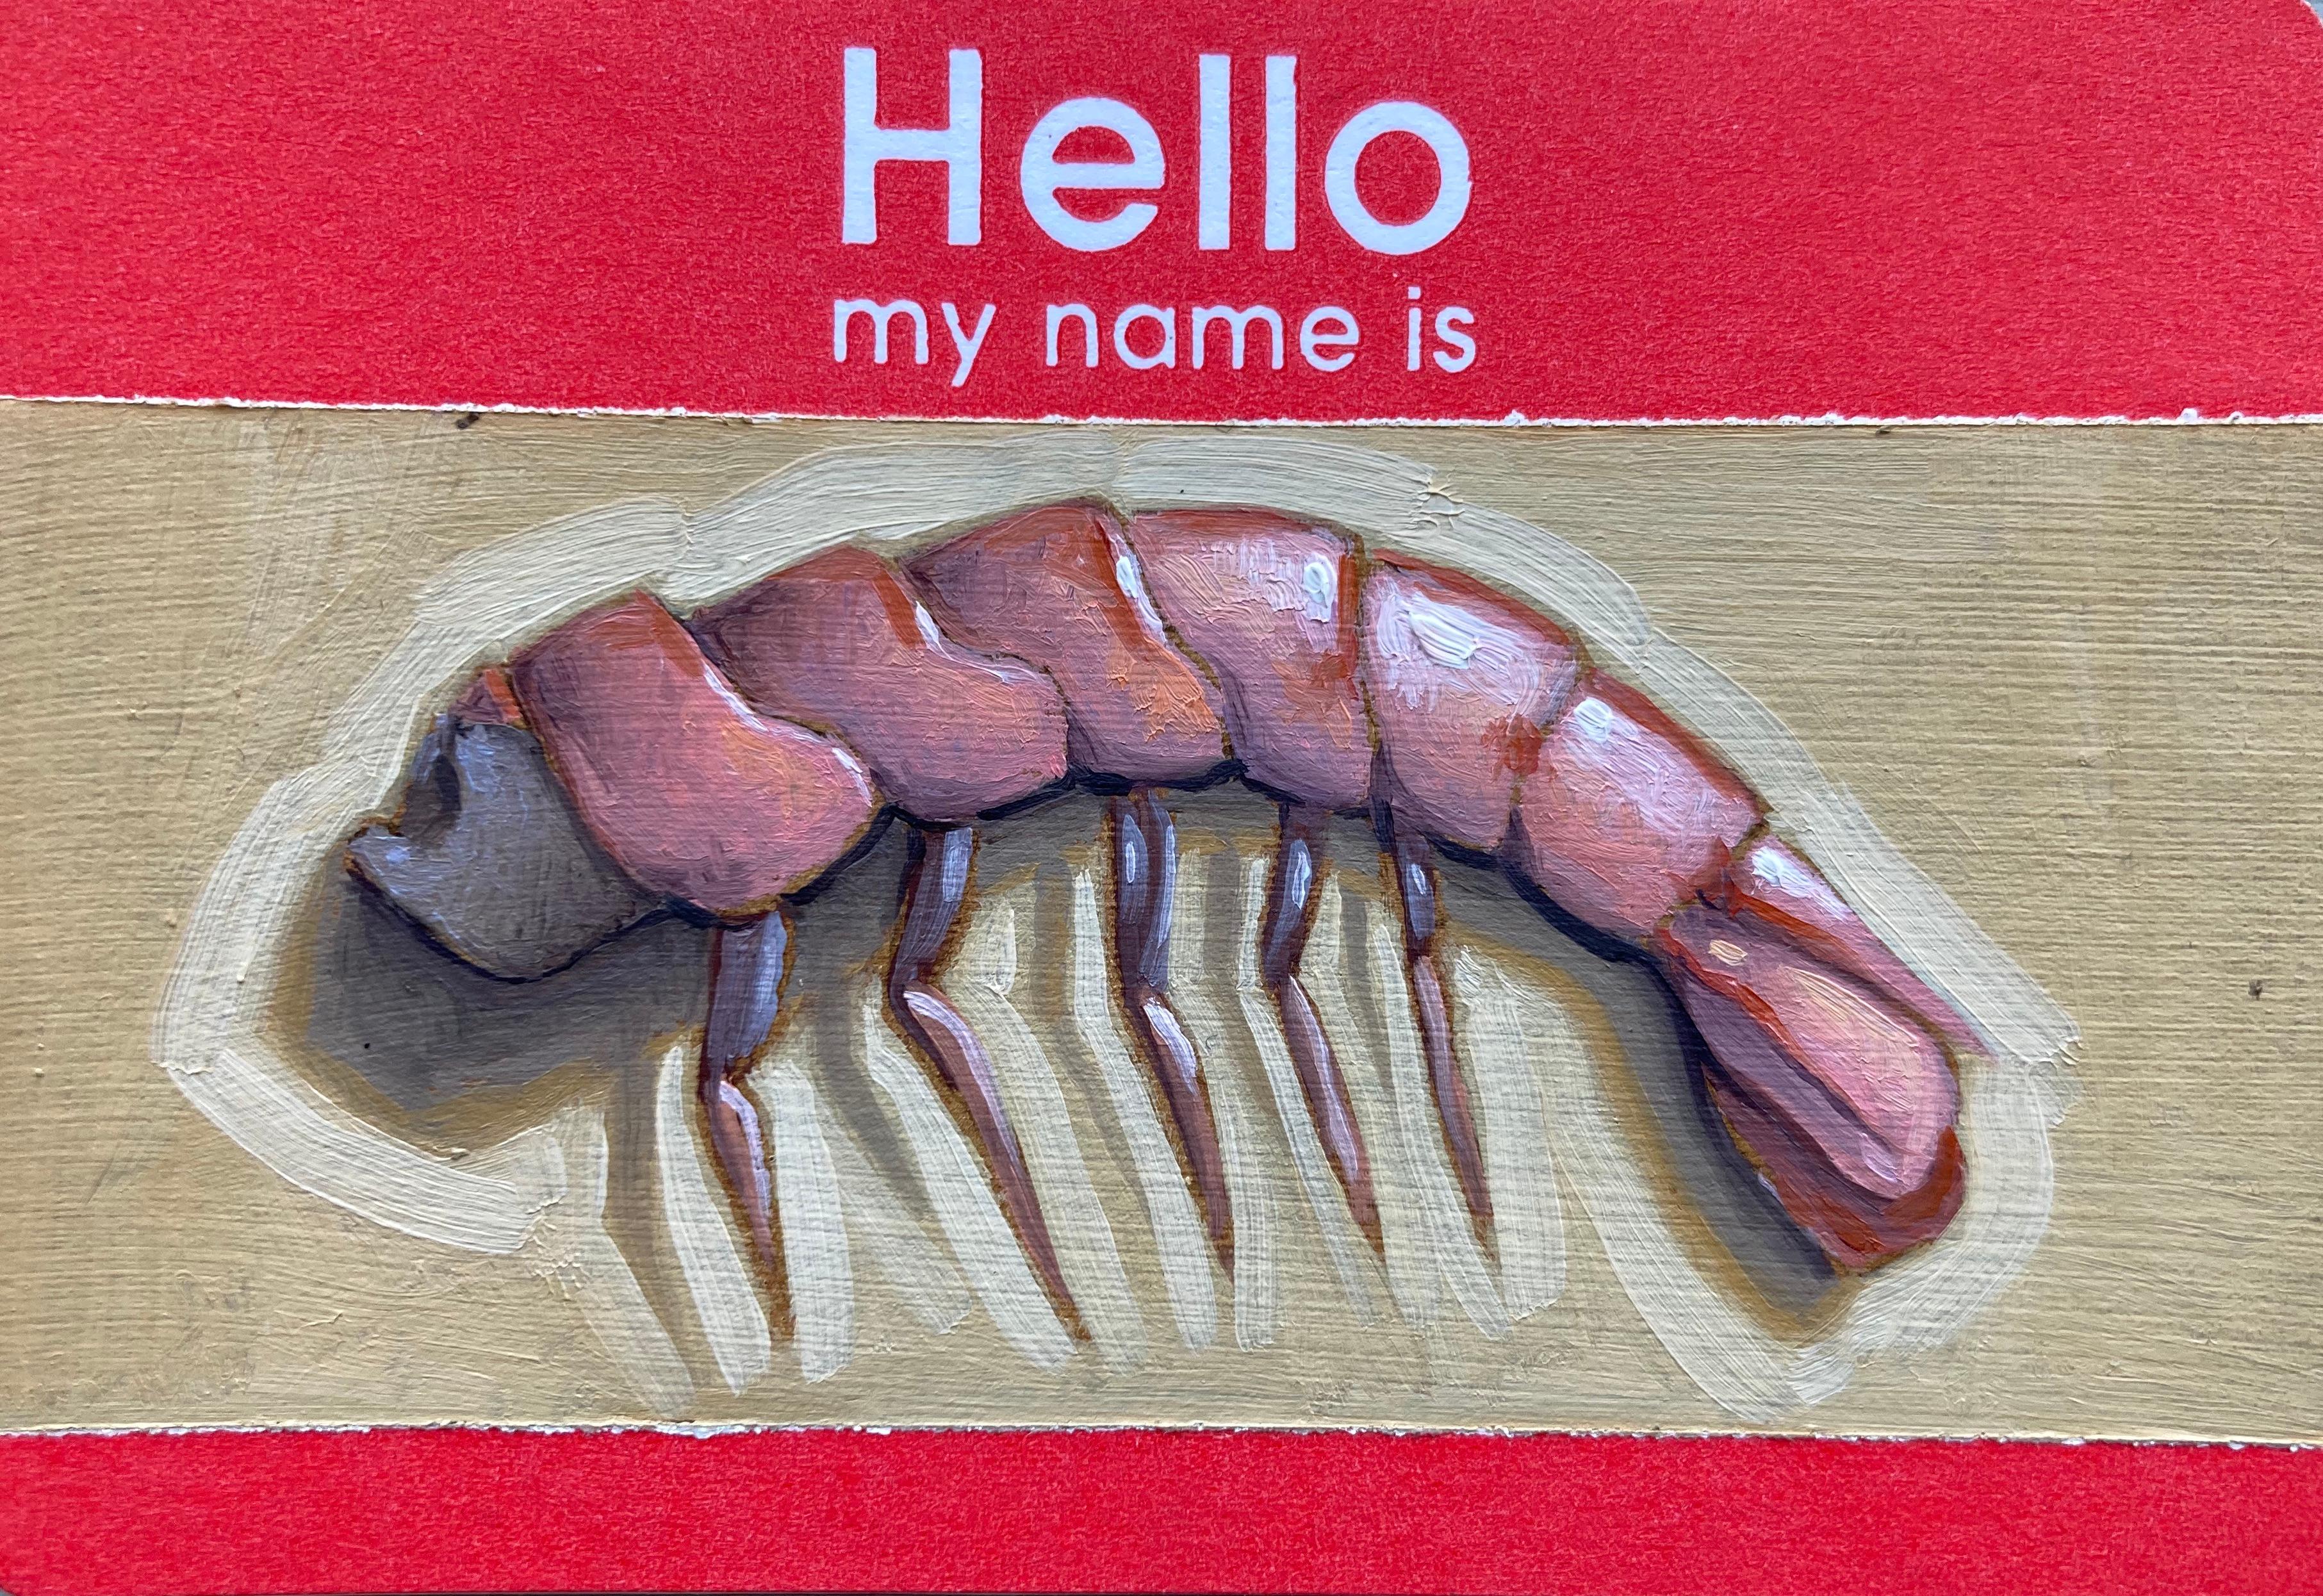 Hello, My Name Is: Shrimp - miniature pictograph painting on paper